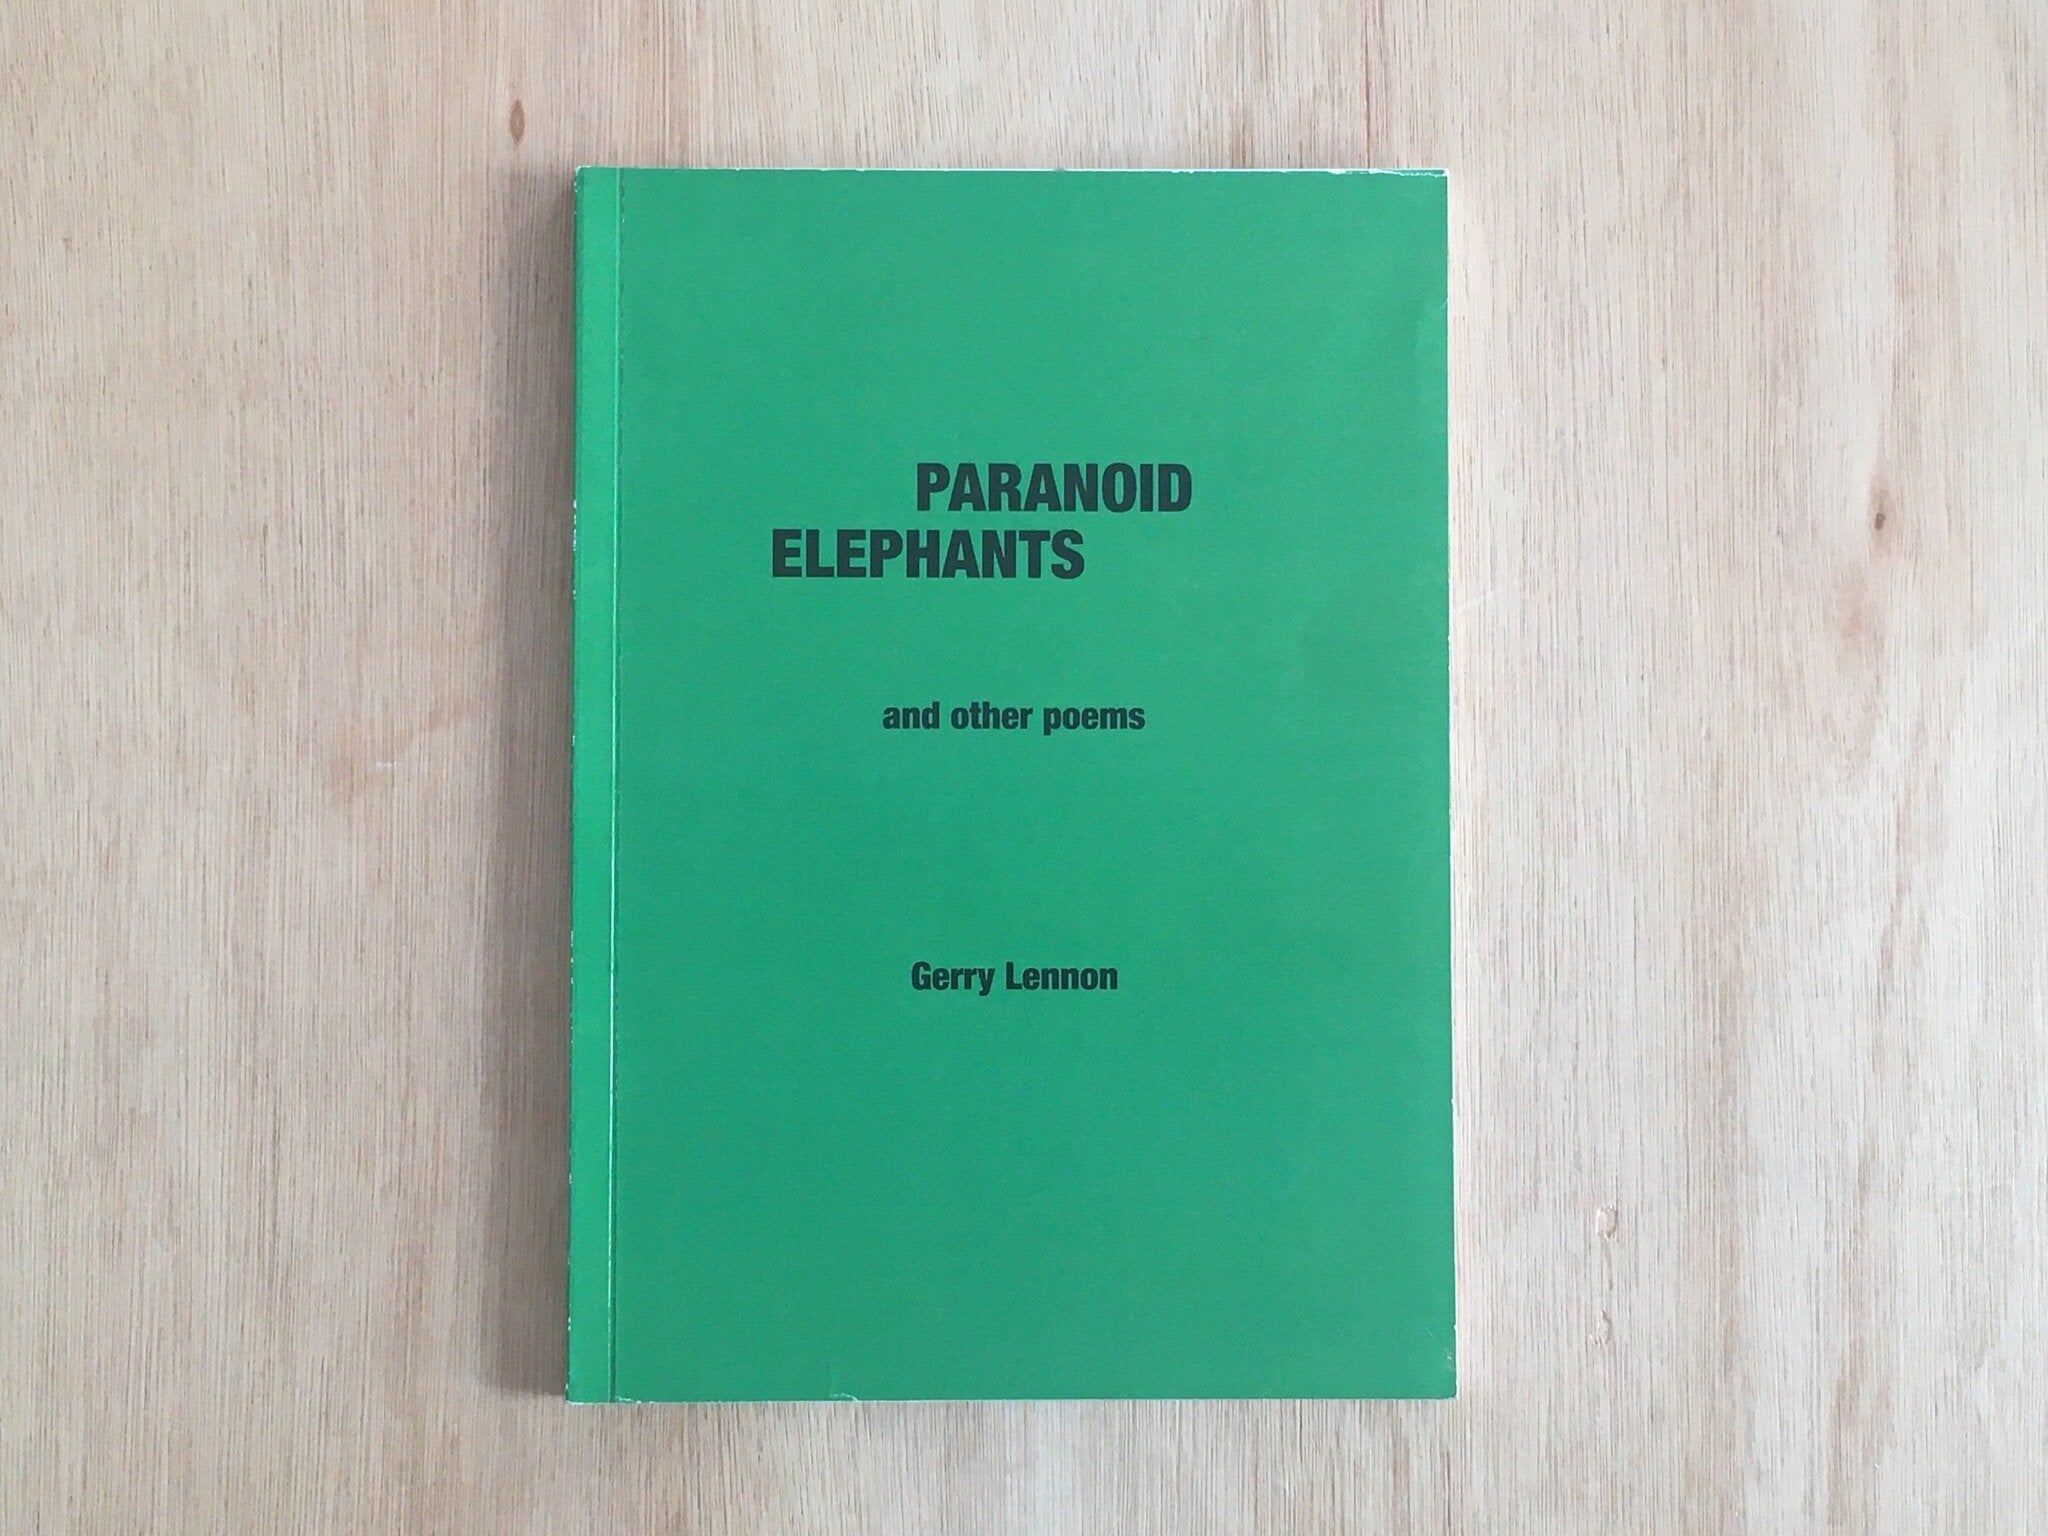 PARANOID ELEPHANTS AND OTHER POEMS by Gerry Lennon